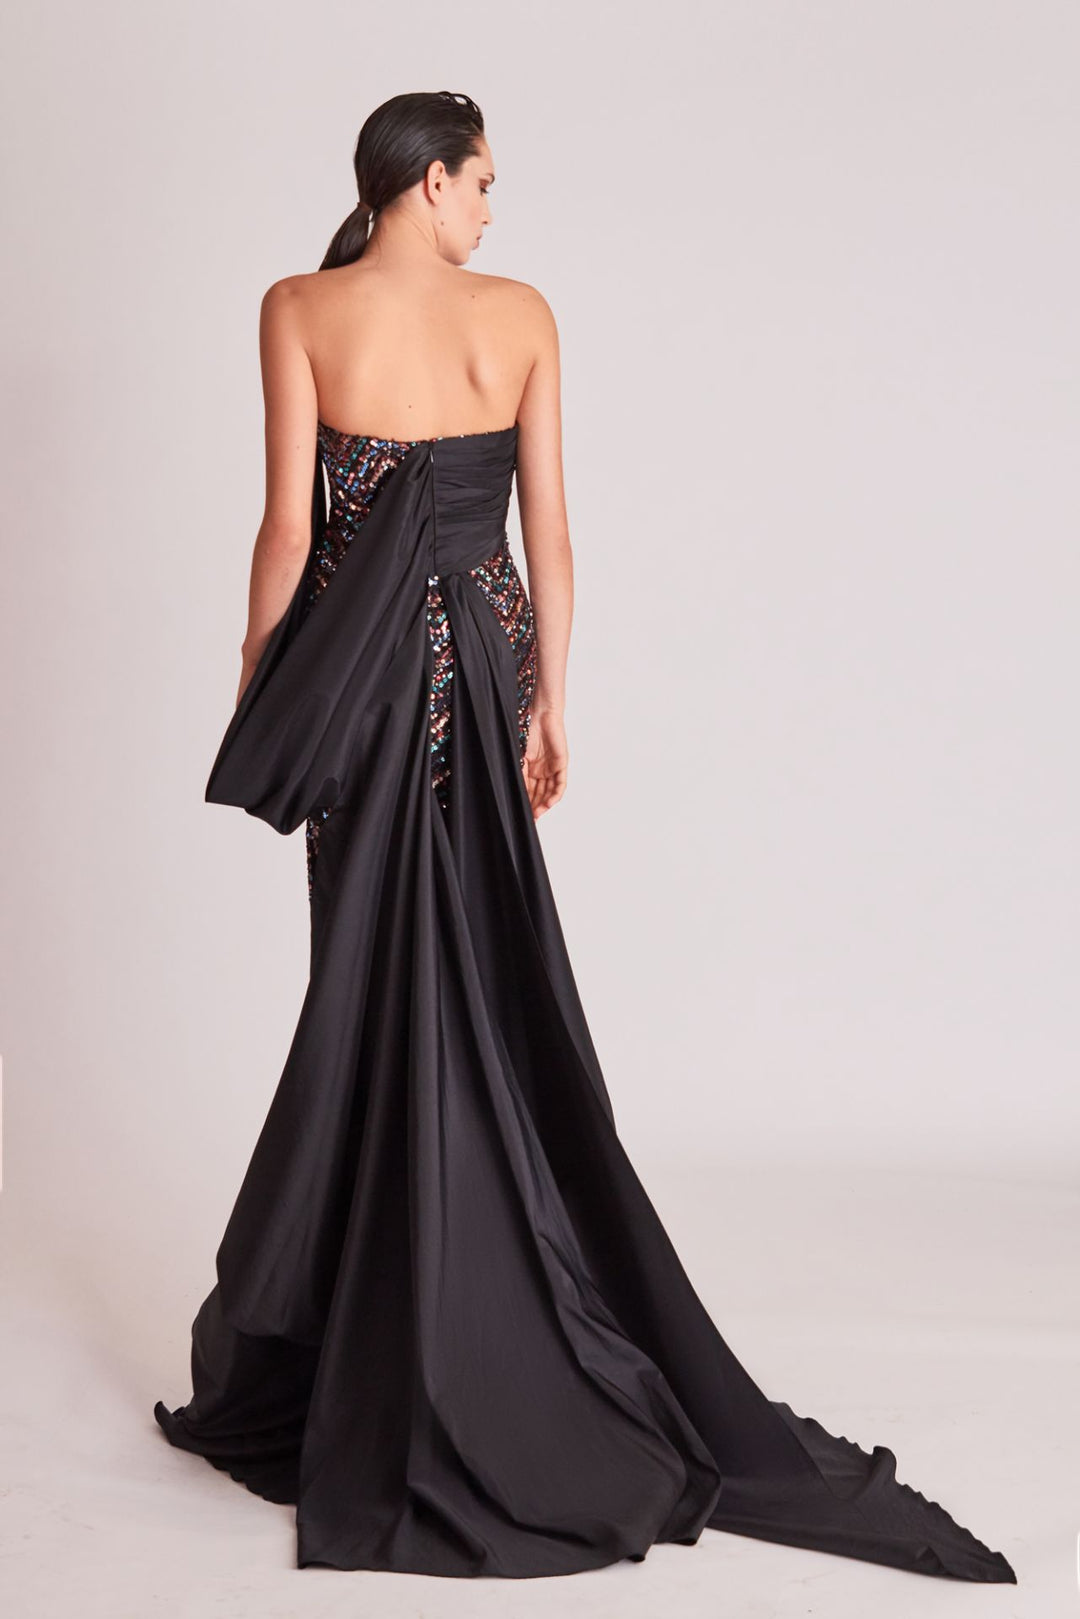 Sequined Strapless Dress with Draping and Train